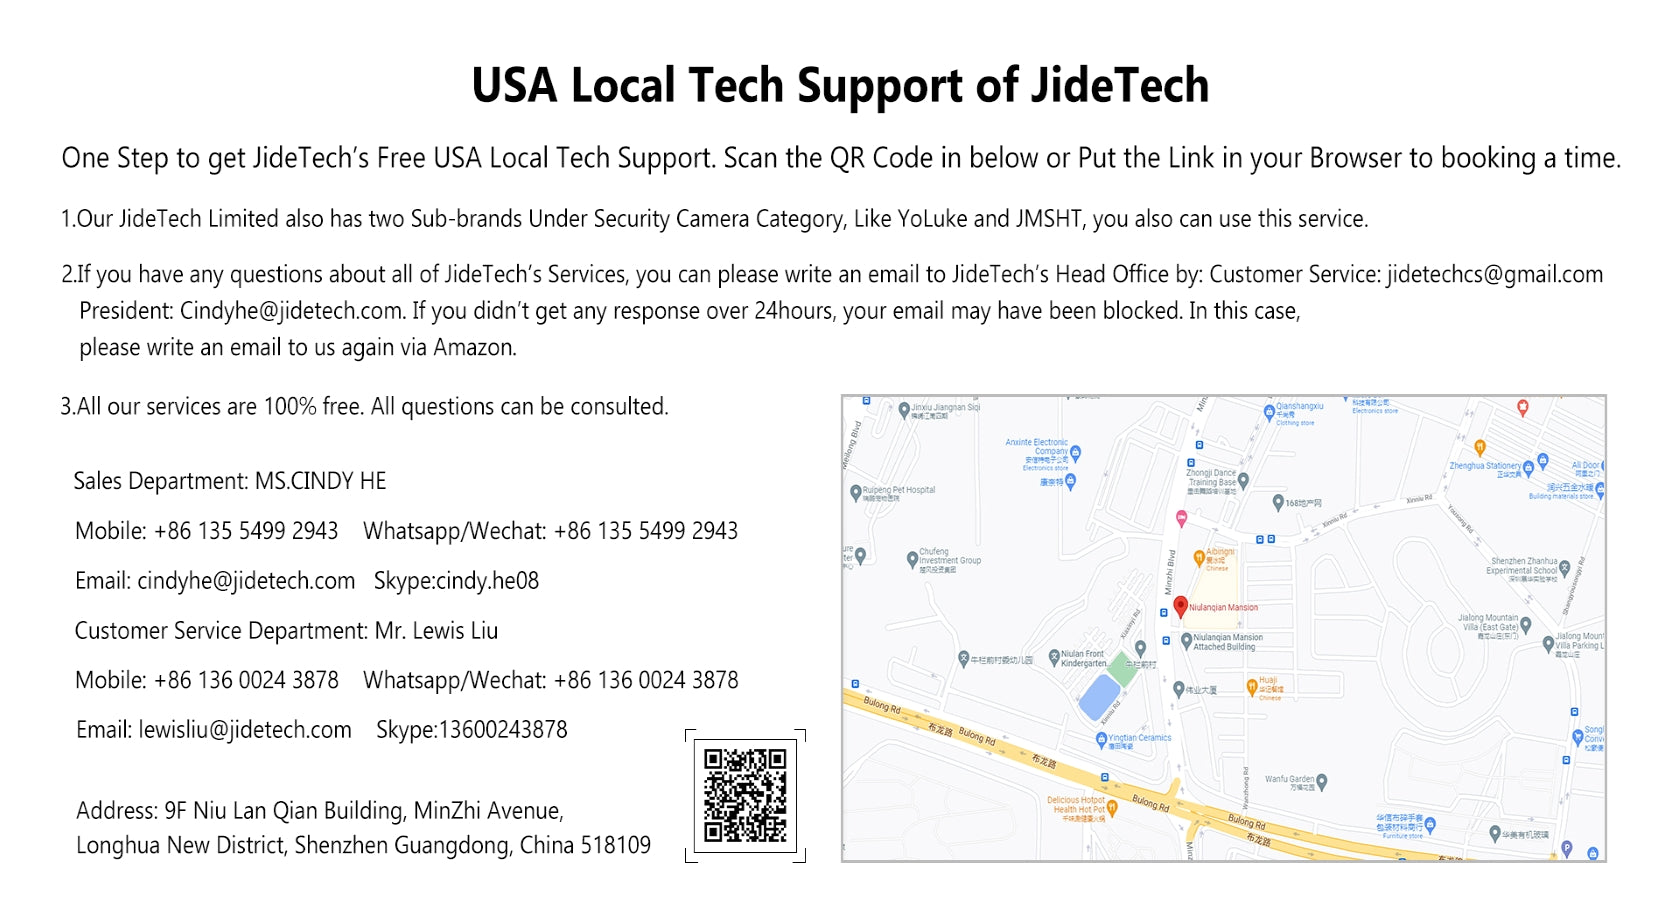 US Local Technology Support